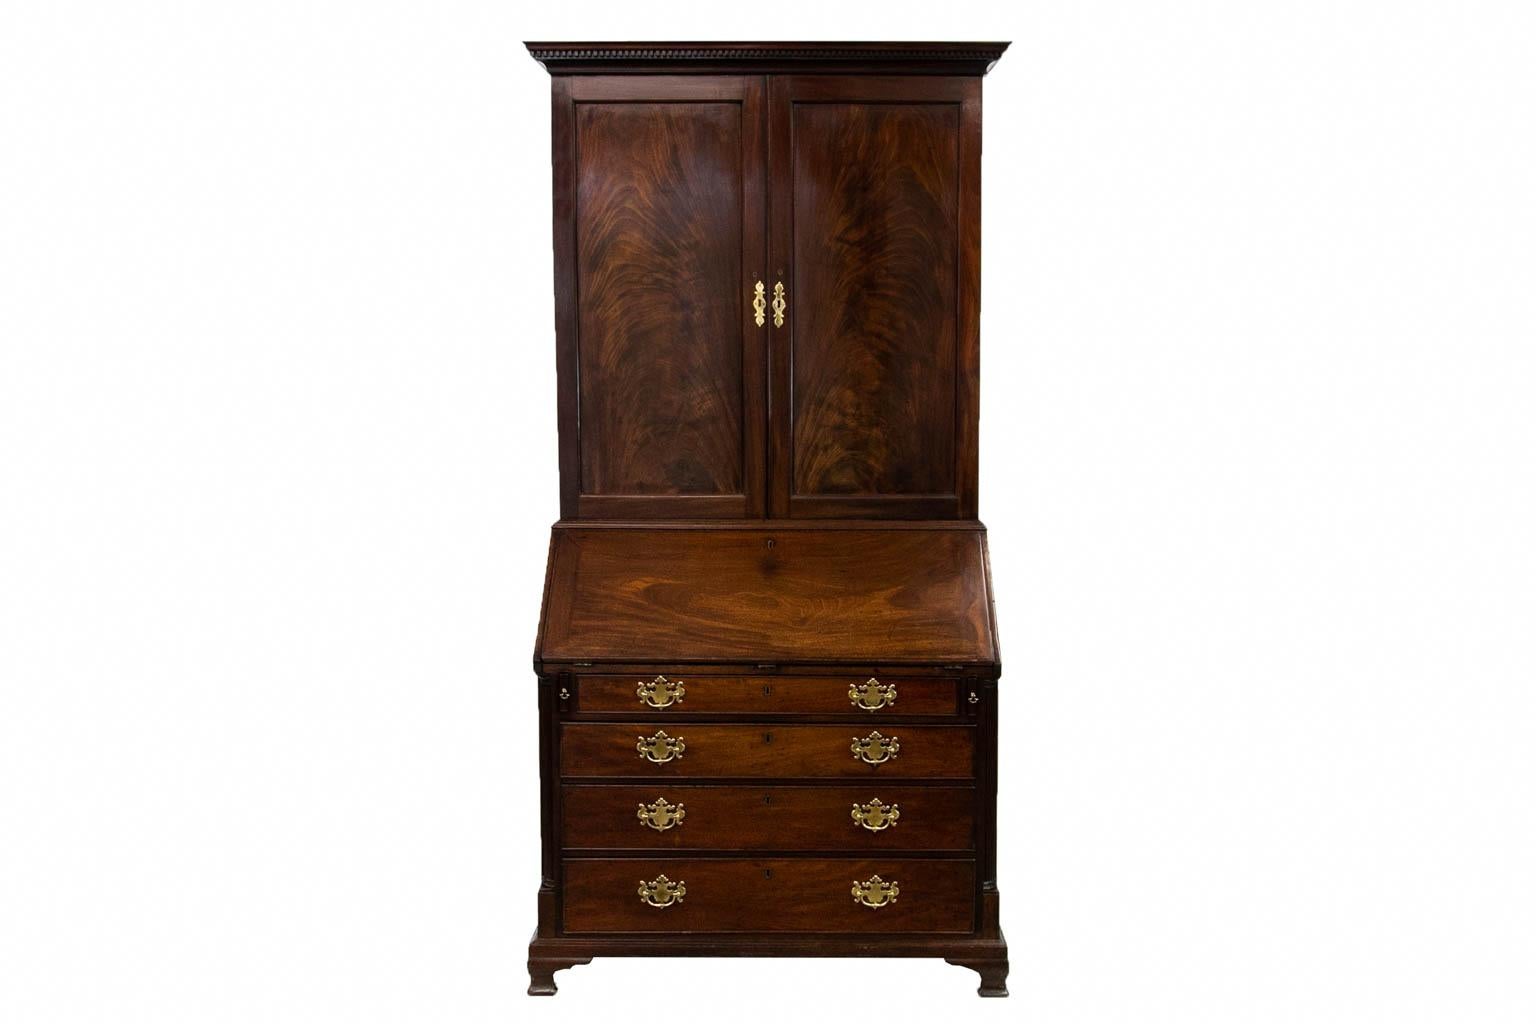 The top interior of this English Chippendale secretary has three adjustable shelves and five drawers. The interior has a center prospect door flanked by two secret pullouts with carved fluted pilasters. The cubbyhole friezes on either side are also